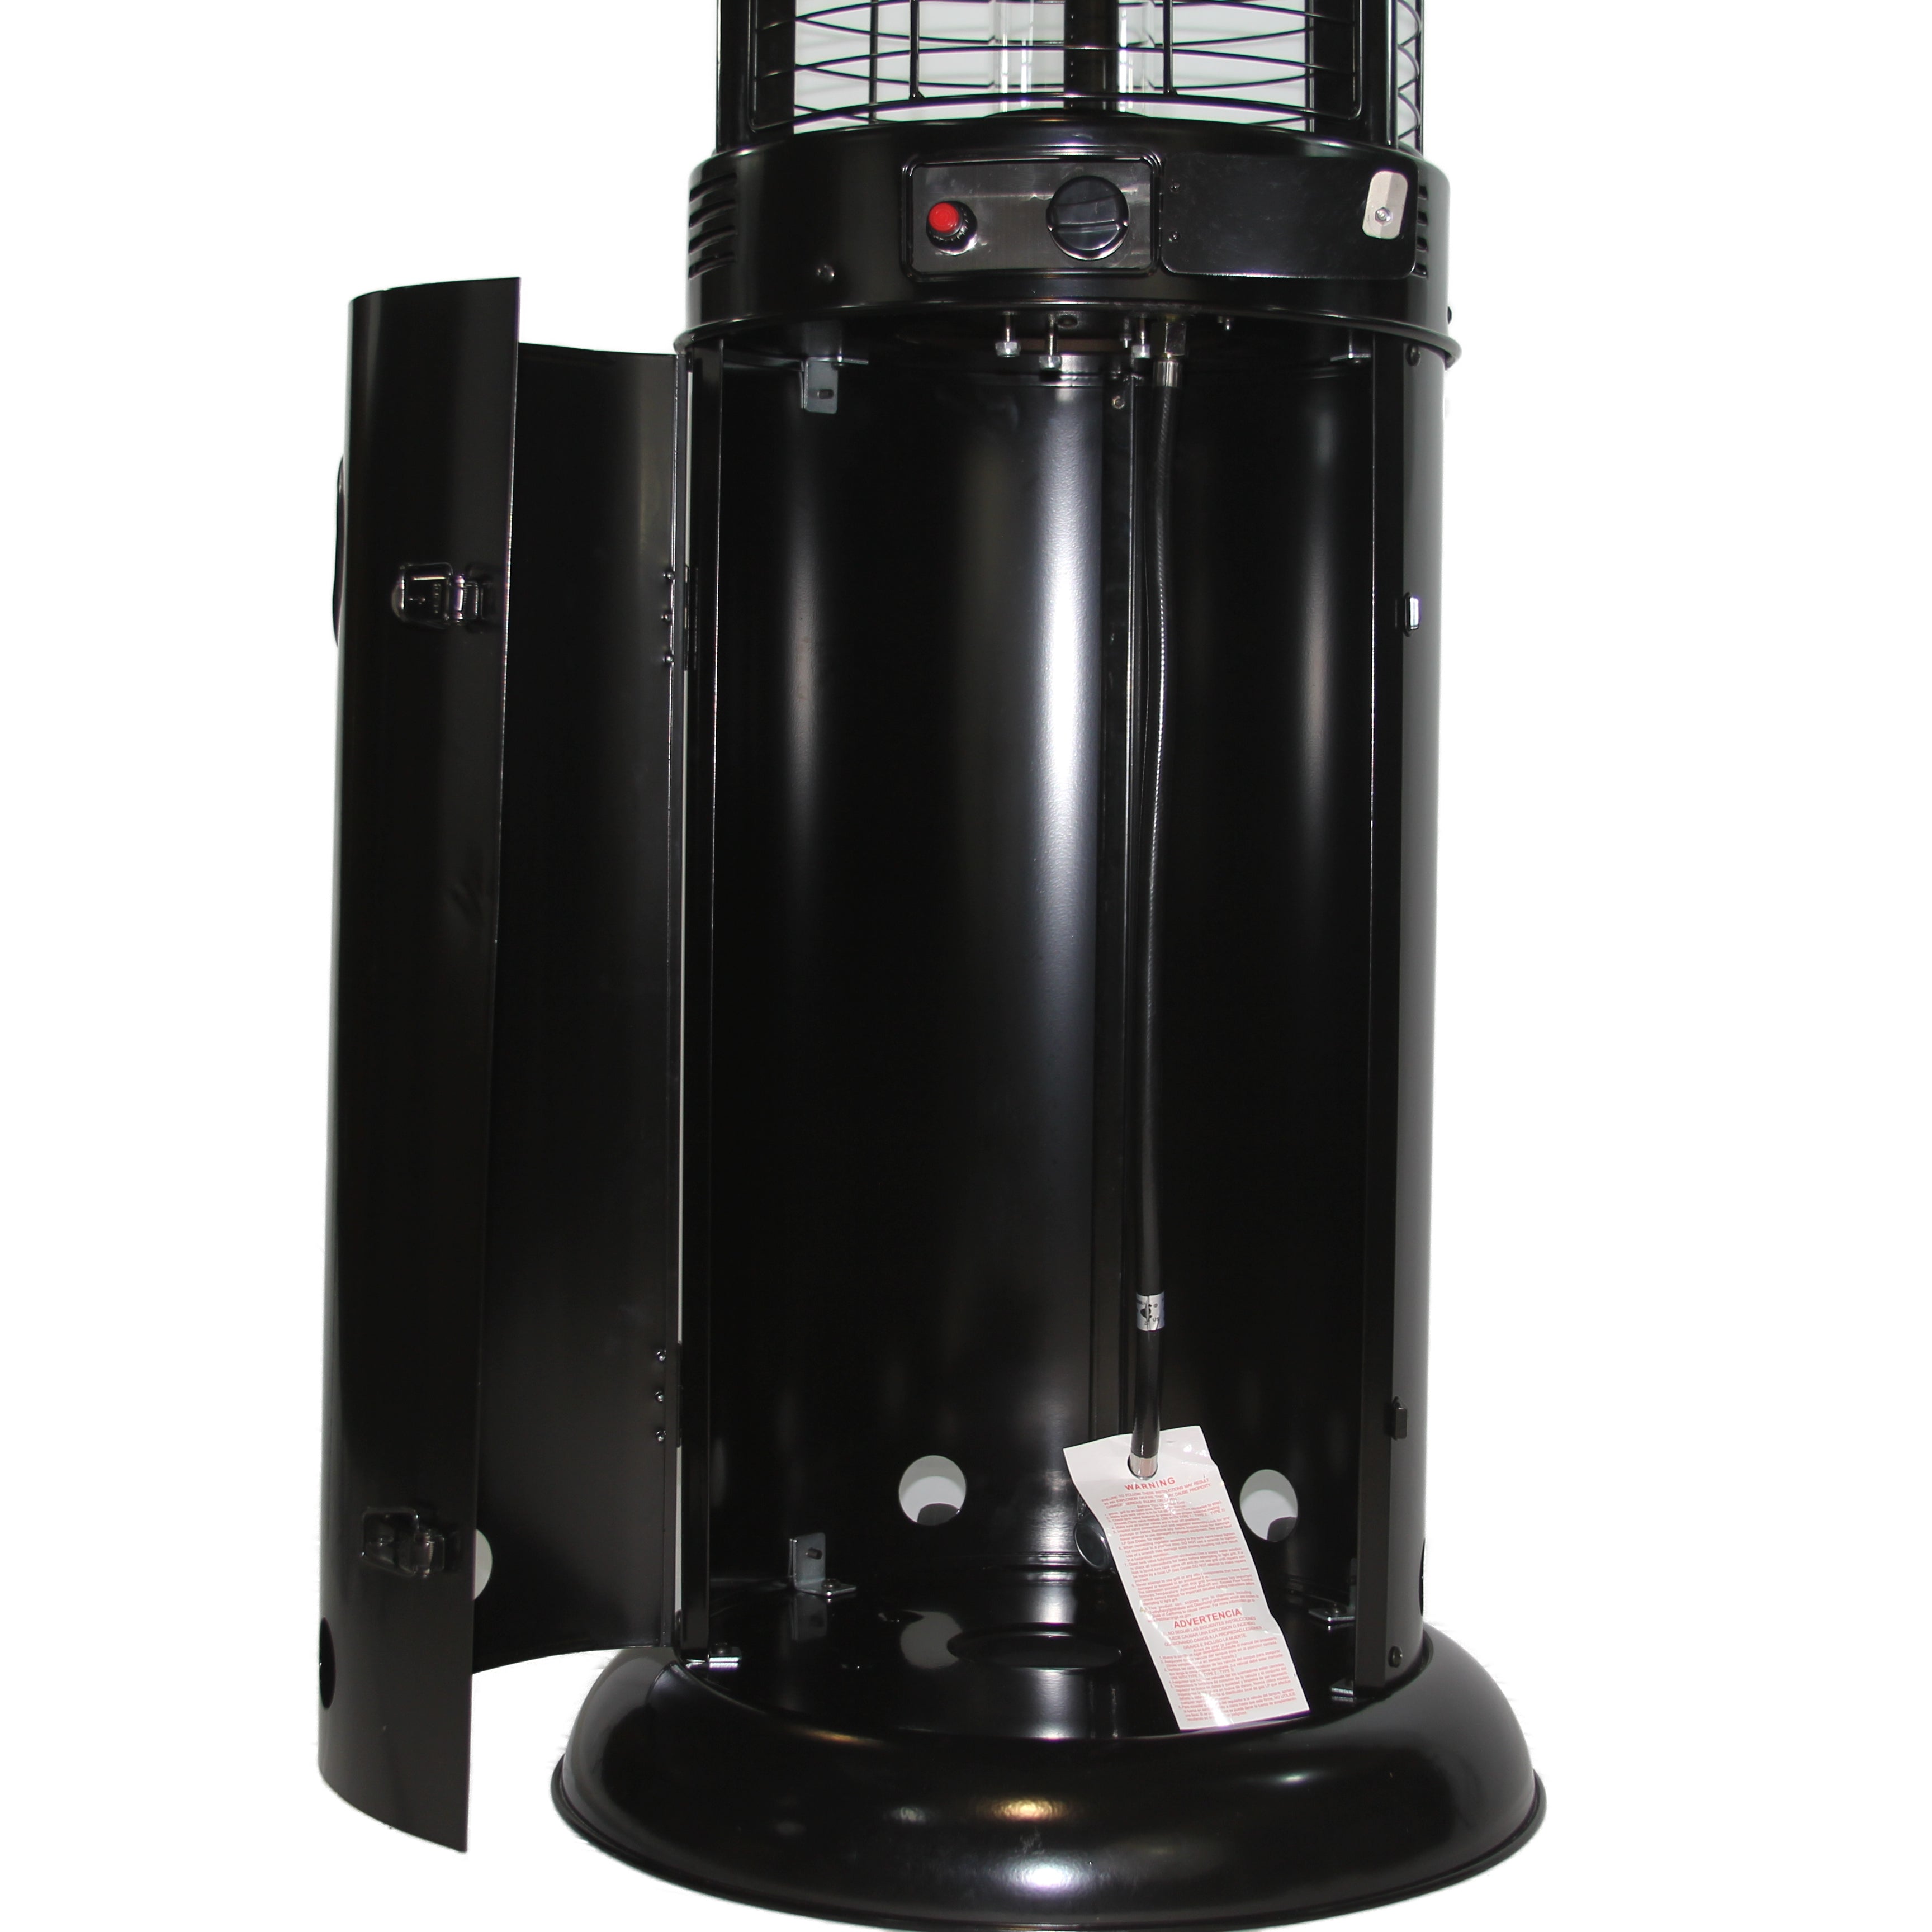 RADtec 80 Ellipse Flame Propane Patio Heater - Black with Clear Glass 41,000 BTU - 80-LLP-PT-HTR - Zoom View Lower Parts